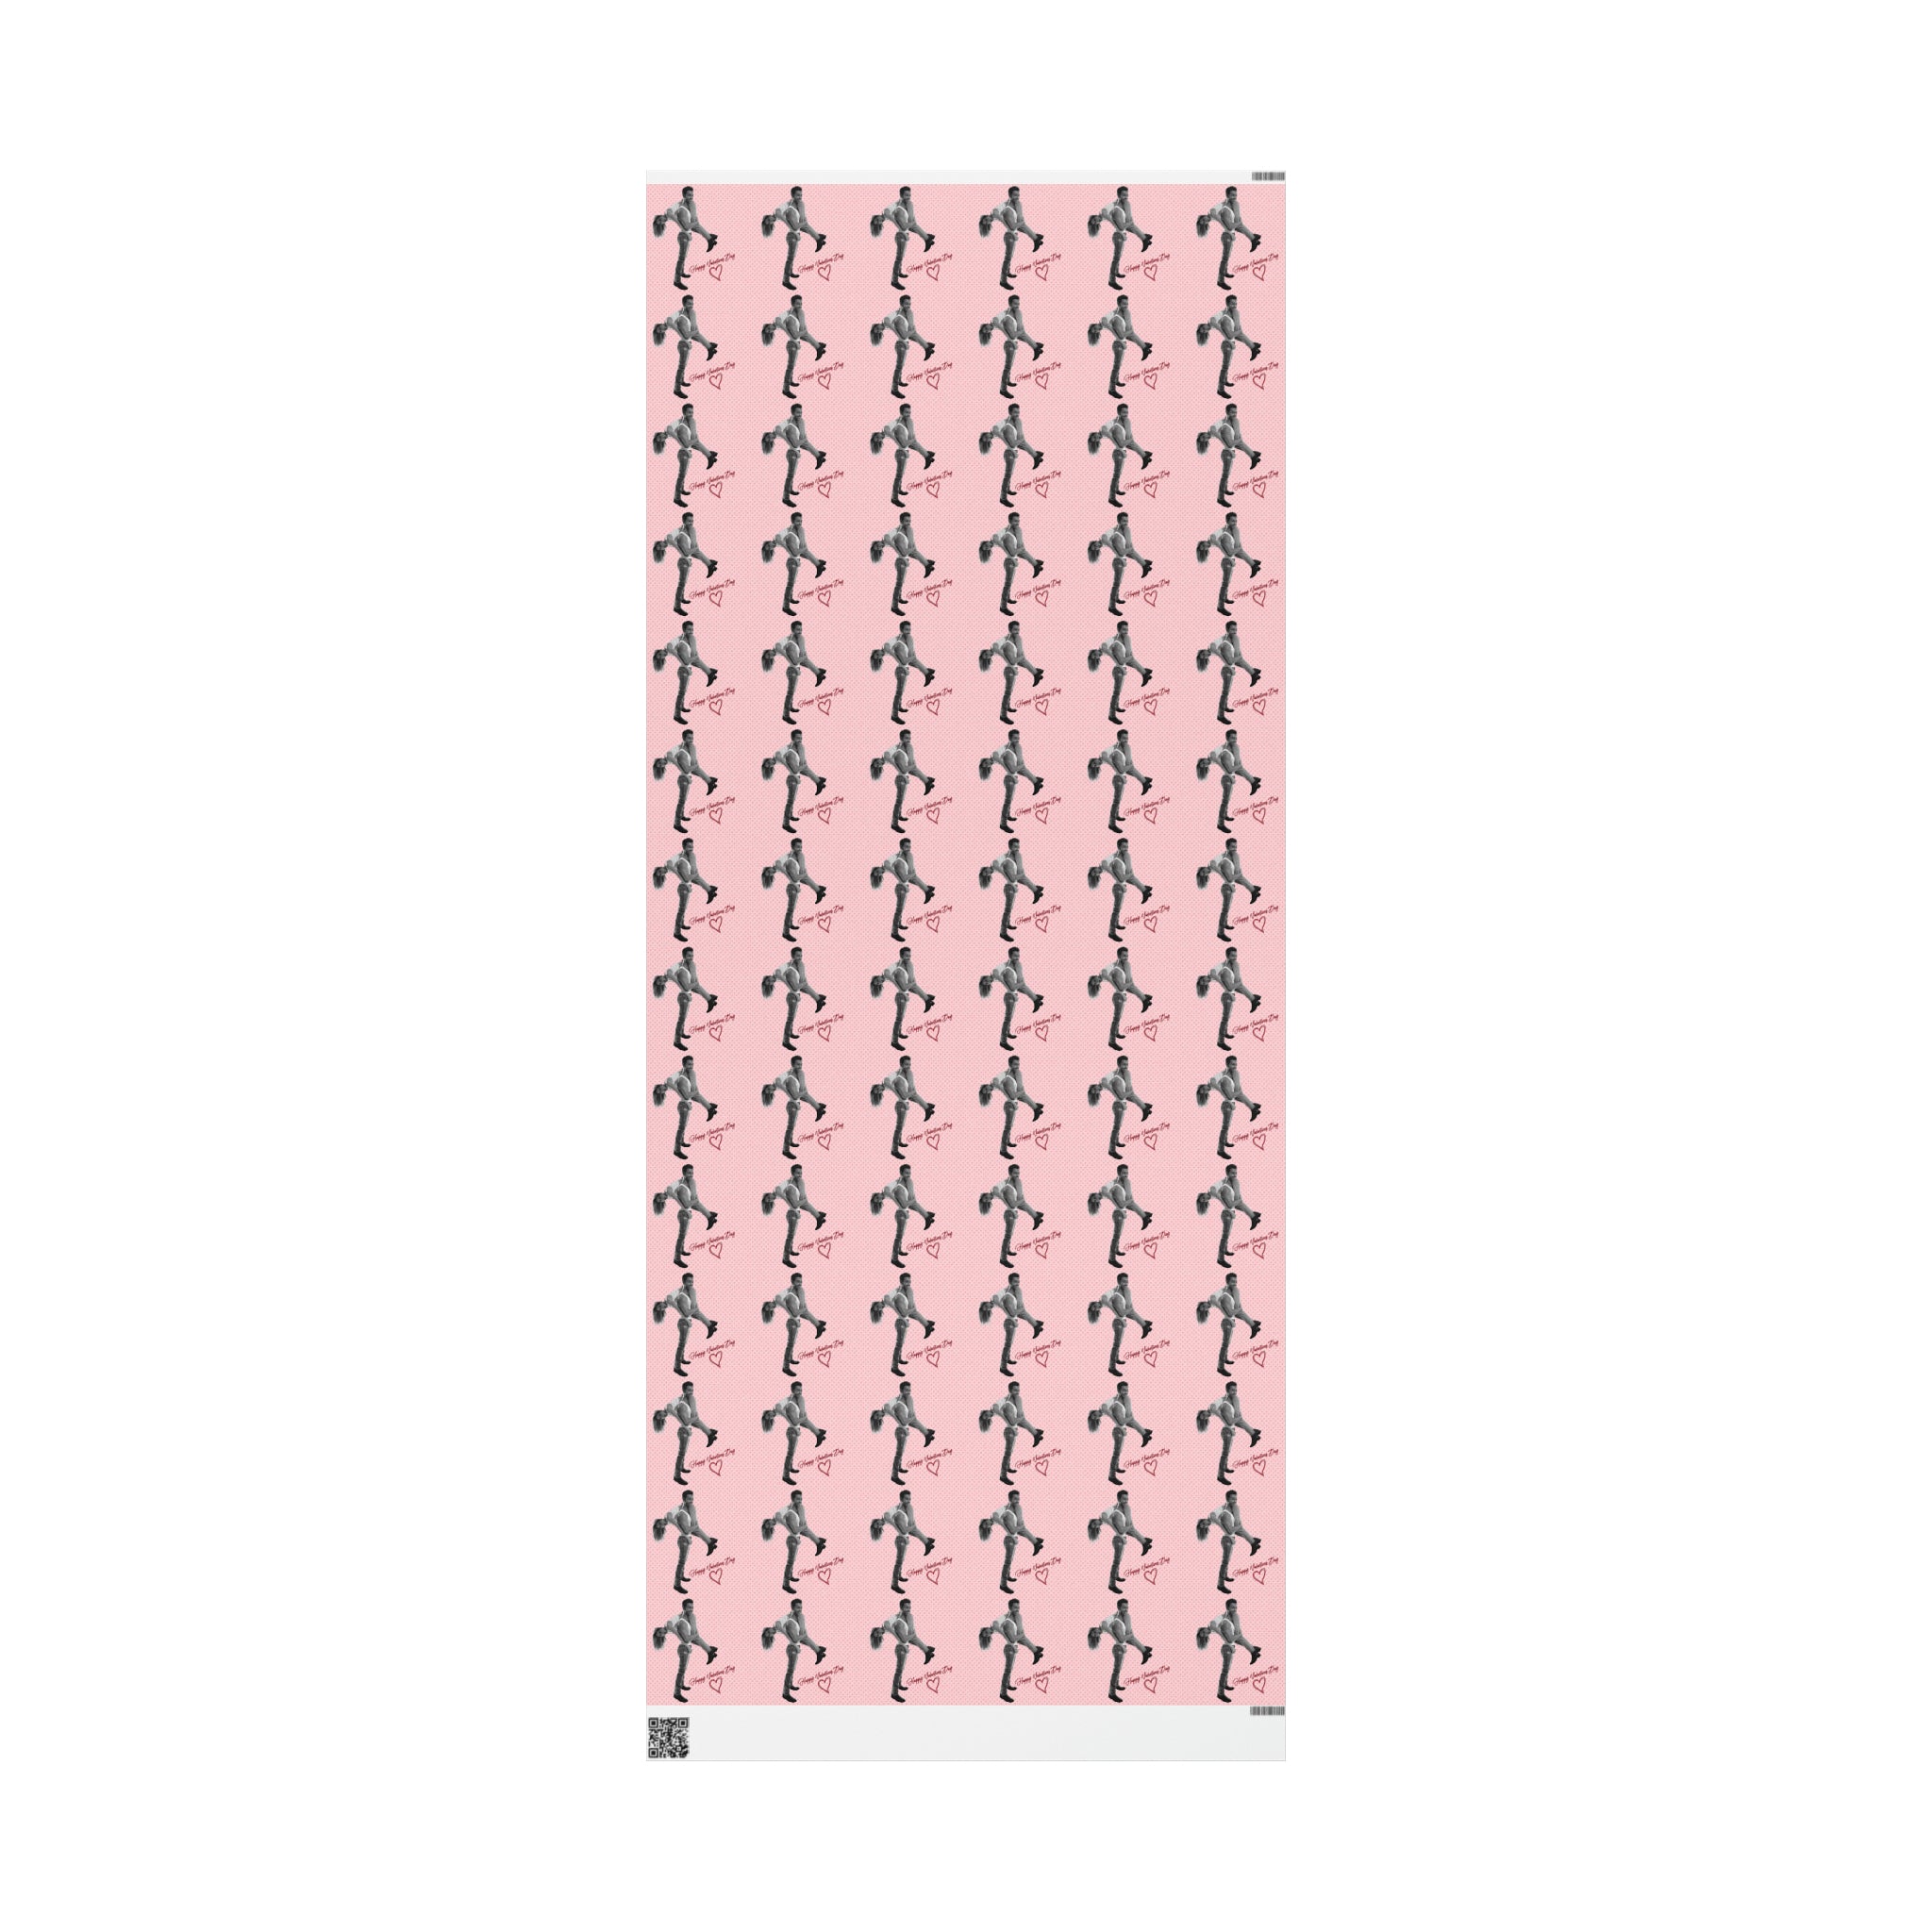 Josslyn and Dex General Hospital Wrapping Paper